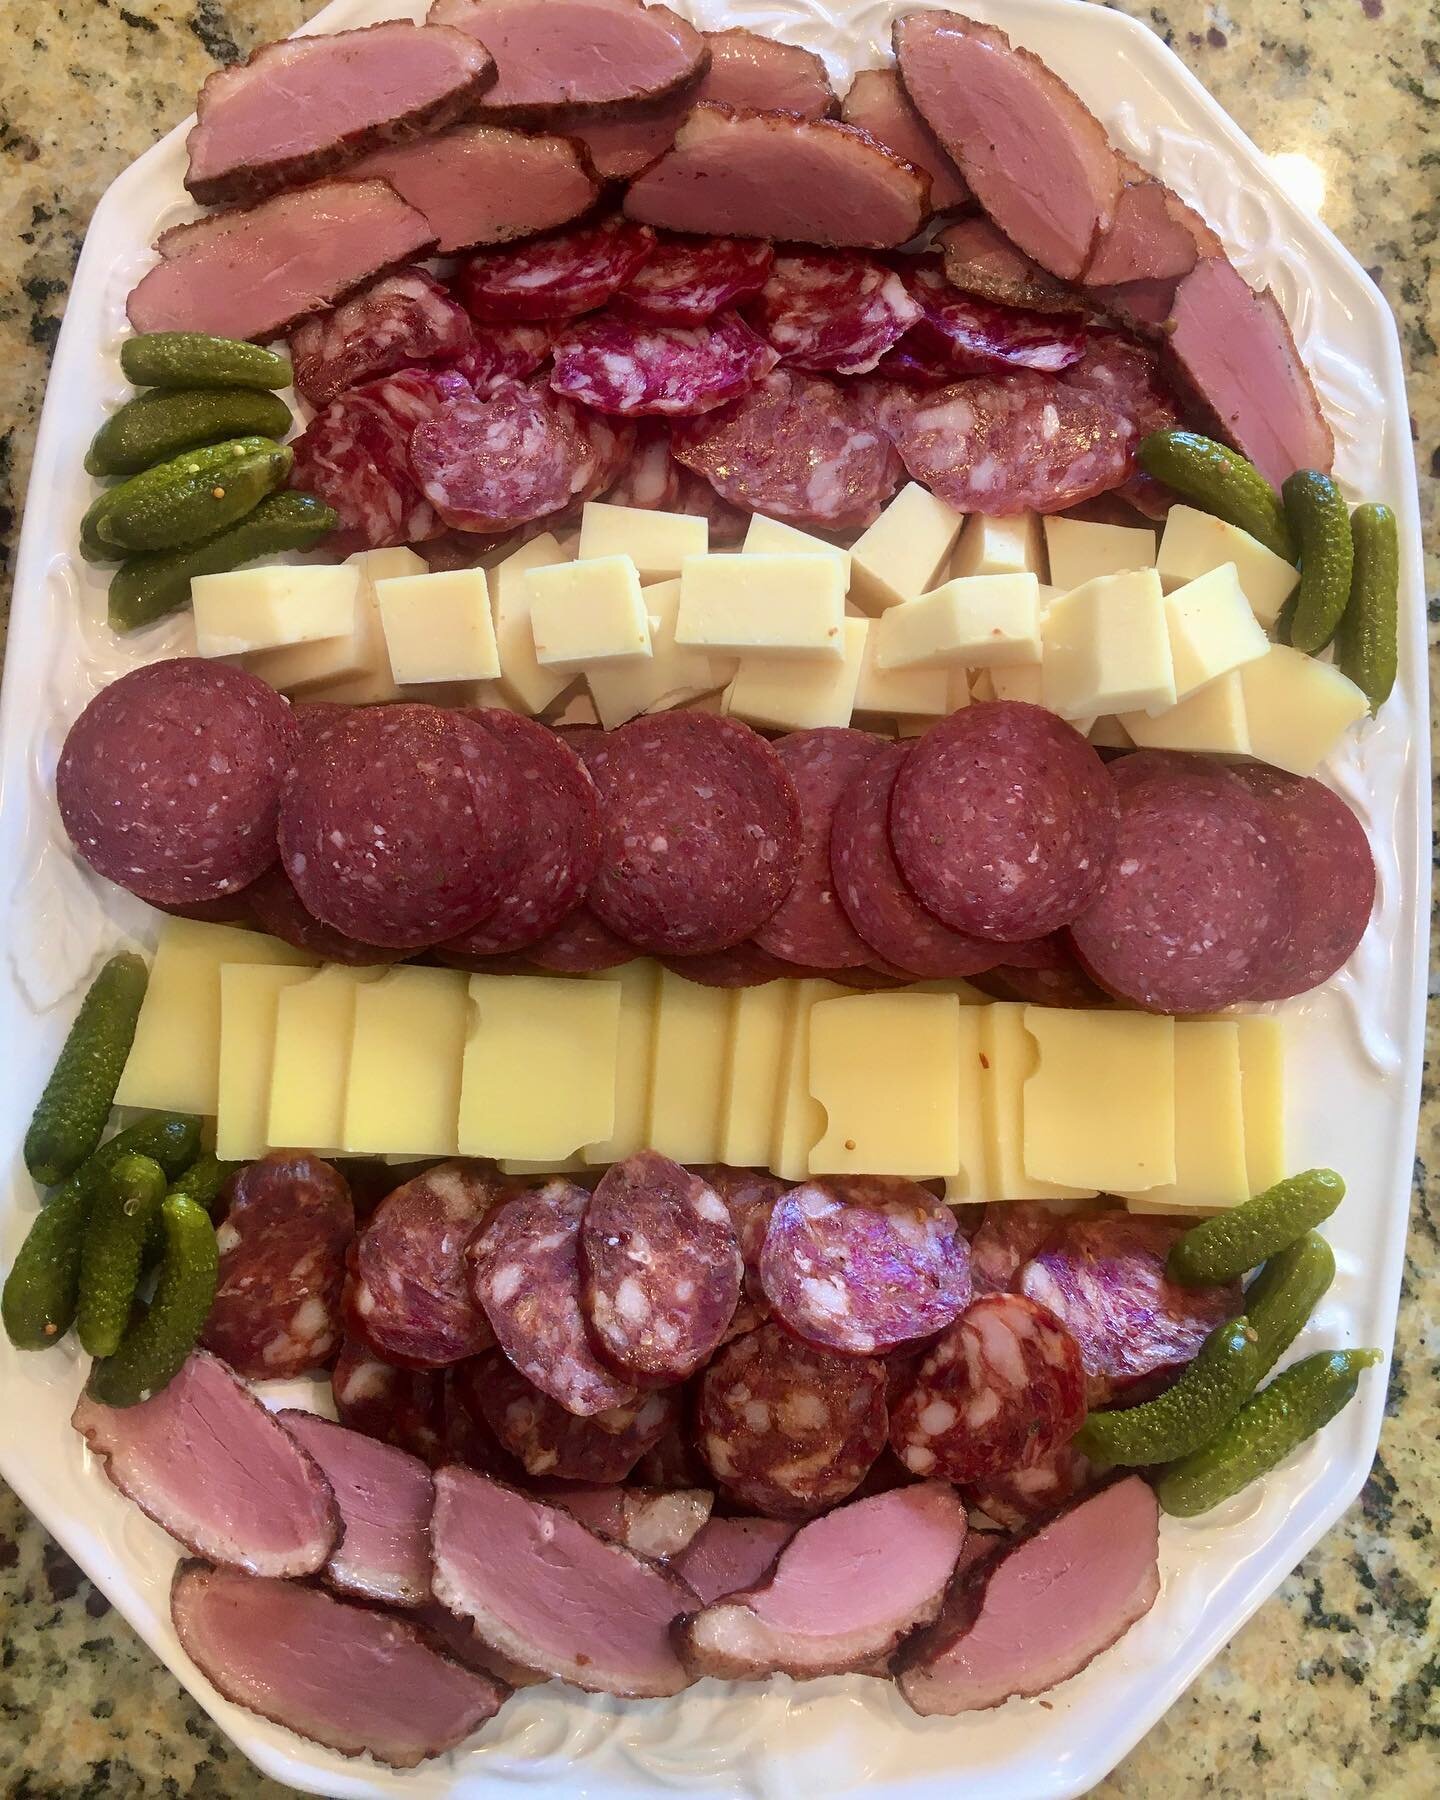 Happy Fourth from Larchmont Charcuterie! #charcuterie #smokedduck #larchmontcharcuterie #saucisson #charcuterieboard #beefsaucisson #artisanmeat